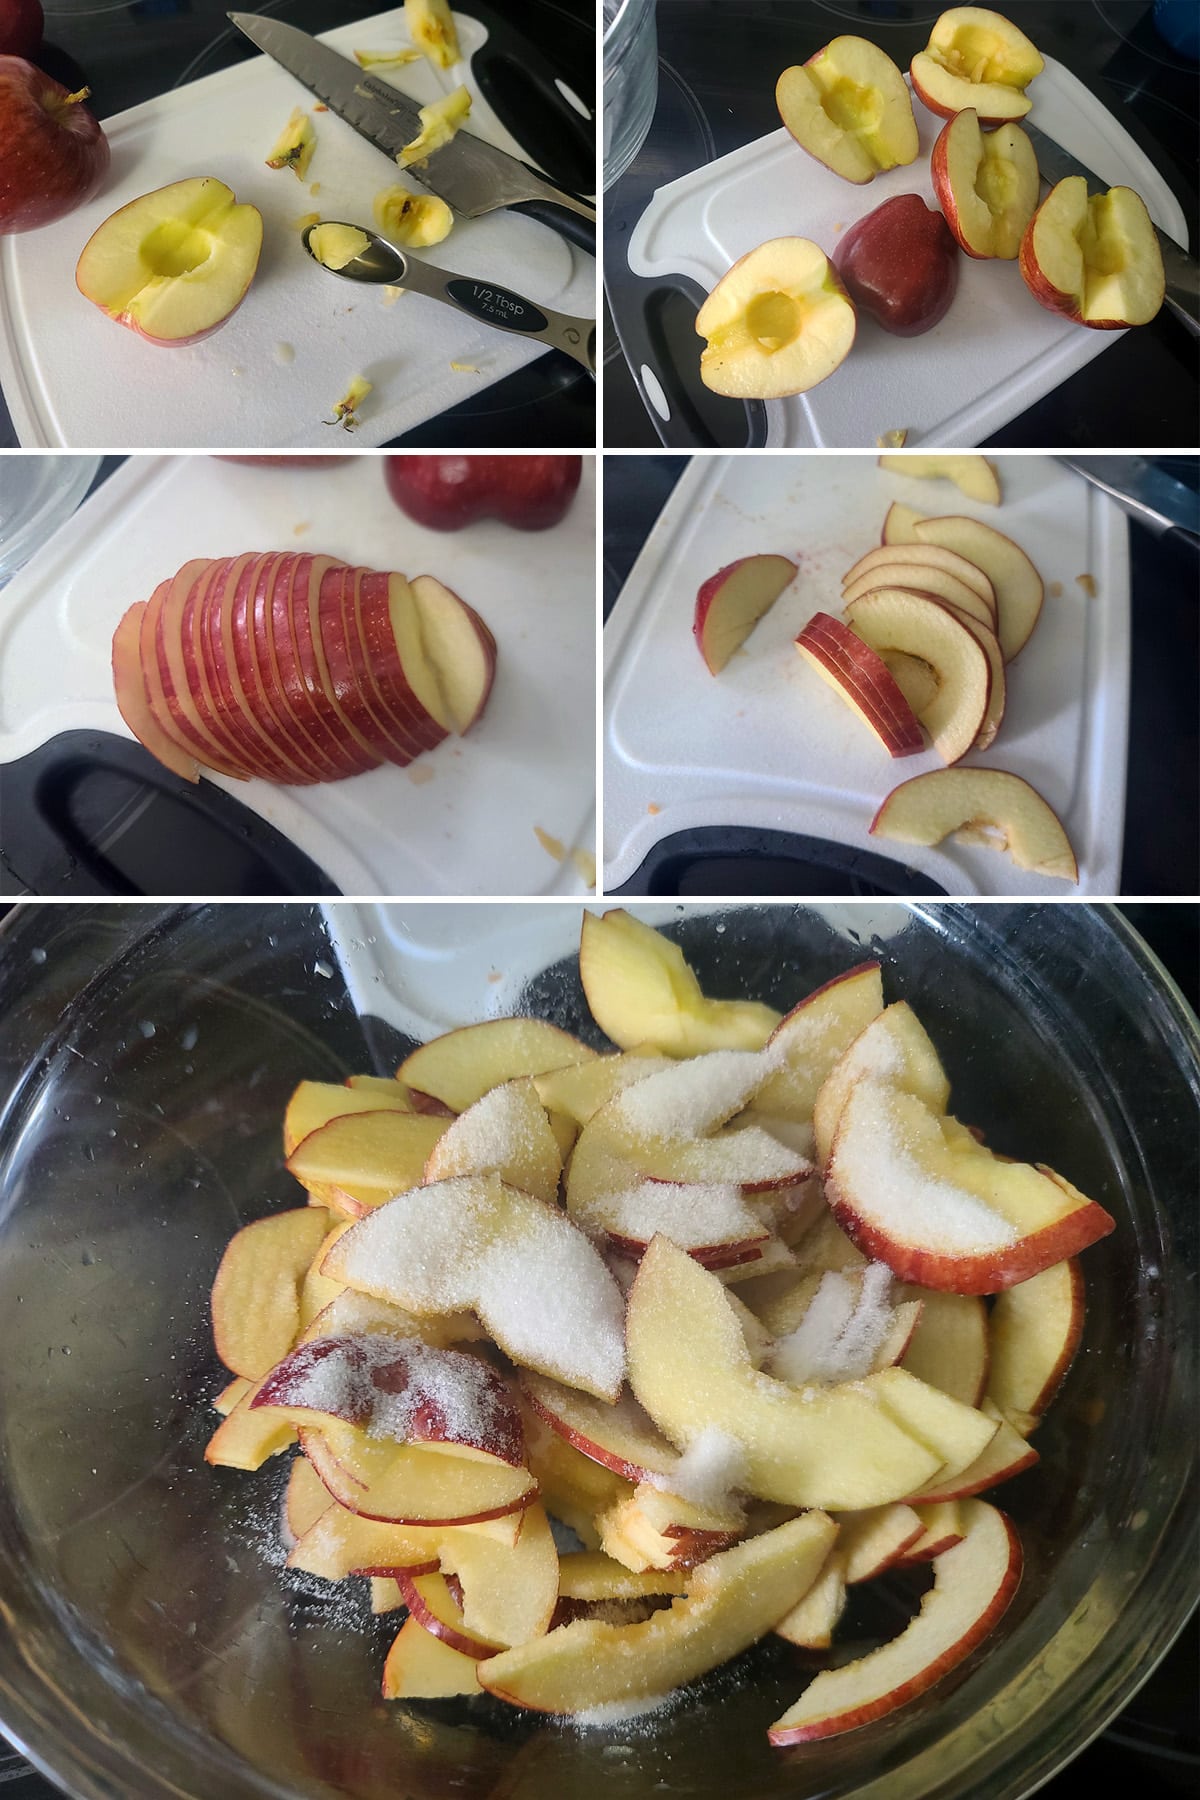 A 5 part image showing apples being cored, sliced, and tossed with sugar.